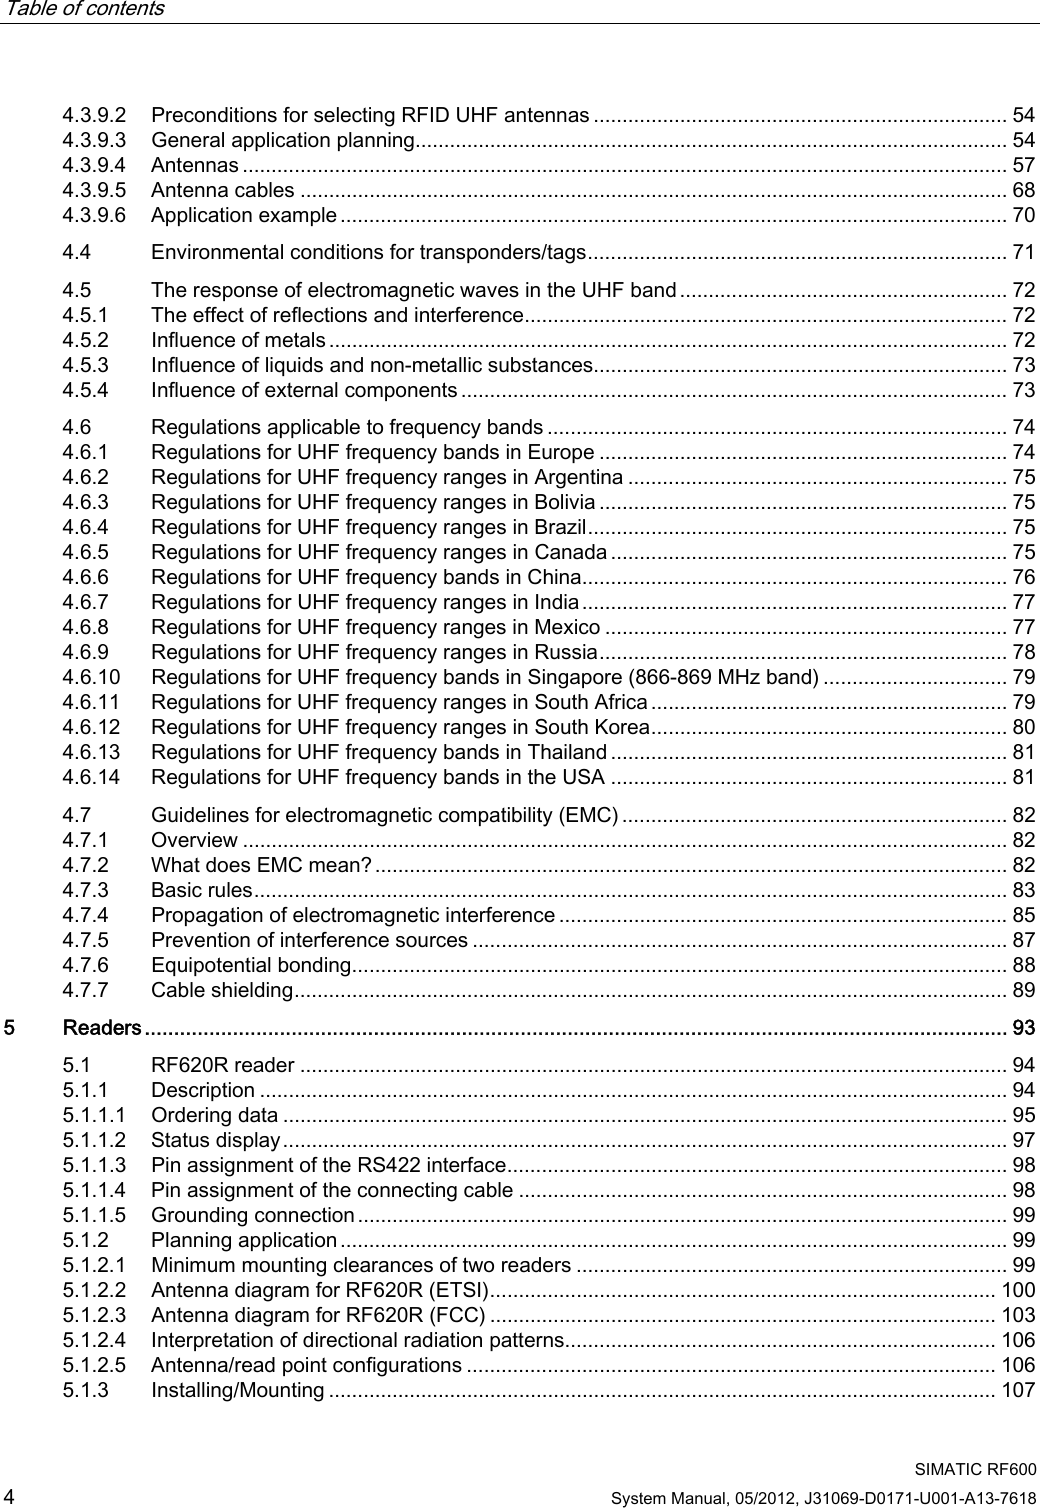 Table of contents      SIMATIC RF600 4 System Manual, 05/2012, J31069-D0171-U001-A13-7618 4.3.9.2  Preconditions for selecting RFID UHF antennas ........................................................................ 54 4.3.9.3  General application planning....................................................................................................... 54 4.3.9.4  Antennas ..................................................................................................................................... 57 4.3.9.5  Antenna cables ........................................................................................................................... 68 4.3.9.6  Application example .................................................................................................................... 70 4.4  Environmental conditions for transponders/tags......................................................................... 71 4.5  The response of electromagnetic waves in the UHF band......................................................... 72 4.5.1  The effect of reflections and interference.................................................................................... 72 4.5.2  Influence of metals...................................................................................................................... 72 4.5.3  Influence of liquids and non-metallic substances........................................................................ 73 4.5.4  Influence of external components ............................................................................................... 73 4.6  Regulations applicable to frequency bands ................................................................................ 74 4.6.1  Regulations for UHF frequency bands in Europe ....................................................................... 74 4.6.2  Regulations for UHF frequency ranges in Argentina .................................................................. 75 4.6.3  Regulations for UHF frequency ranges in Bolivia ....................................................................... 75 4.6.4  Regulations for UHF frequency ranges in Brazil......................................................................... 75 4.6.5  Regulations for UHF frequency ranges in Canada ..................................................................... 75 4.6.6  Regulations for UHF frequency bands in China.......................................................................... 76 4.6.7  Regulations for UHF frequency ranges in India.......................................................................... 77 4.6.8  Regulations for UHF frequency ranges in Mexico ...................................................................... 77 4.6.9  Regulations for UHF frequency ranges in Russia....................................................................... 78 4.6.10  Regulations for UHF frequency bands in Singapore (866-869 MHz band) ................................ 79 4.6.11  Regulations for UHF frequency ranges in South Africa .............................................................. 79 4.6.12  Regulations for UHF frequency ranges in South Korea.............................................................. 80 4.6.13  Regulations for UHF frequency bands in Thailand ..................................................................... 81 4.6.14  Regulations for UHF frequency bands in the USA ..................................................................... 81 4.7  Guidelines for electromagnetic compatibility (EMC) ................................................................... 82 4.7.1  Overview ..................................................................................................................................... 82 4.7.2  What does EMC mean?.............................................................................................................. 82 4.7.3  Basic rules................................................................................................................................... 83 4.7.4  Propagation of electromagnetic interference ..............................................................................85 4.7.5  Prevention of interference sources ............................................................................................. 87 4.7.6  Equipotential bonding.................................................................................................................. 88 4.7.7  Cable shielding............................................................................................................................ 89 5  Readers................................................................................................................................................... 93 5.1  RF620R reader ........................................................................................................................... 94 5.1.1  Description .................................................................................................................................. 94 5.1.1.1  Ordering data .............................................................................................................................. 95 5.1.1.2  Status display.............................................................................................................................. 97 5.1.1.3  Pin assignment of the RS422 interface....................................................................................... 98 5.1.1.4  Pin assignment of the connecting cable ..................................................................................... 98 5.1.1.5  Grounding connection ................................................................................................................. 99 5.1.2  Planning application.................................................................................................................... 99 5.1.2.1  Minimum mounting clearances of two readers ........................................................................... 99 5.1.2.2  Antenna diagram for RF620R (ETSI)........................................................................................ 100 5.1.2.3  Antenna diagram for RF620R (FCC) ........................................................................................ 103 5.1.2.4  Interpretation of directional radiation patterns........................................................................... 106 5.1.2.5  Antenna/read point configurations ............................................................................................ 106 5.1.3  Installing/Mounting .................................................................................................................... 107 